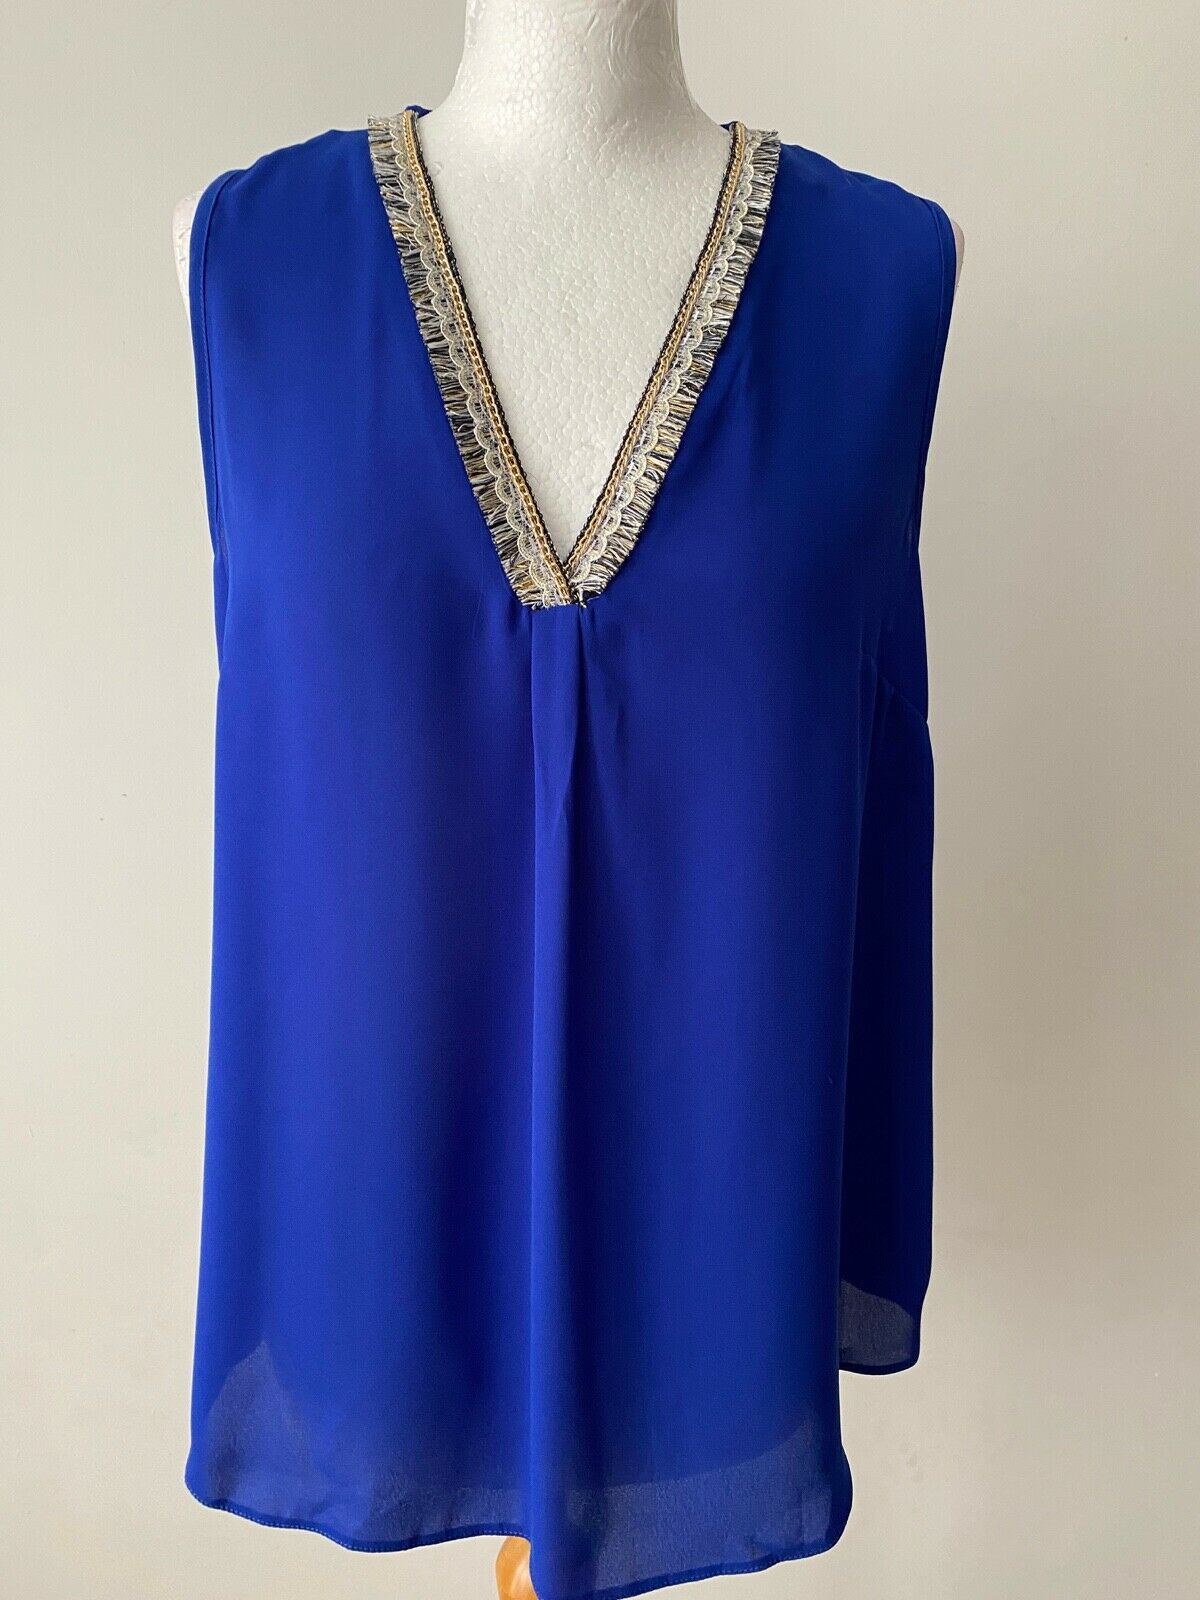 Dorothy Perkins Sleeveless Blouse Size 14 Embroidered Available in Blue or White